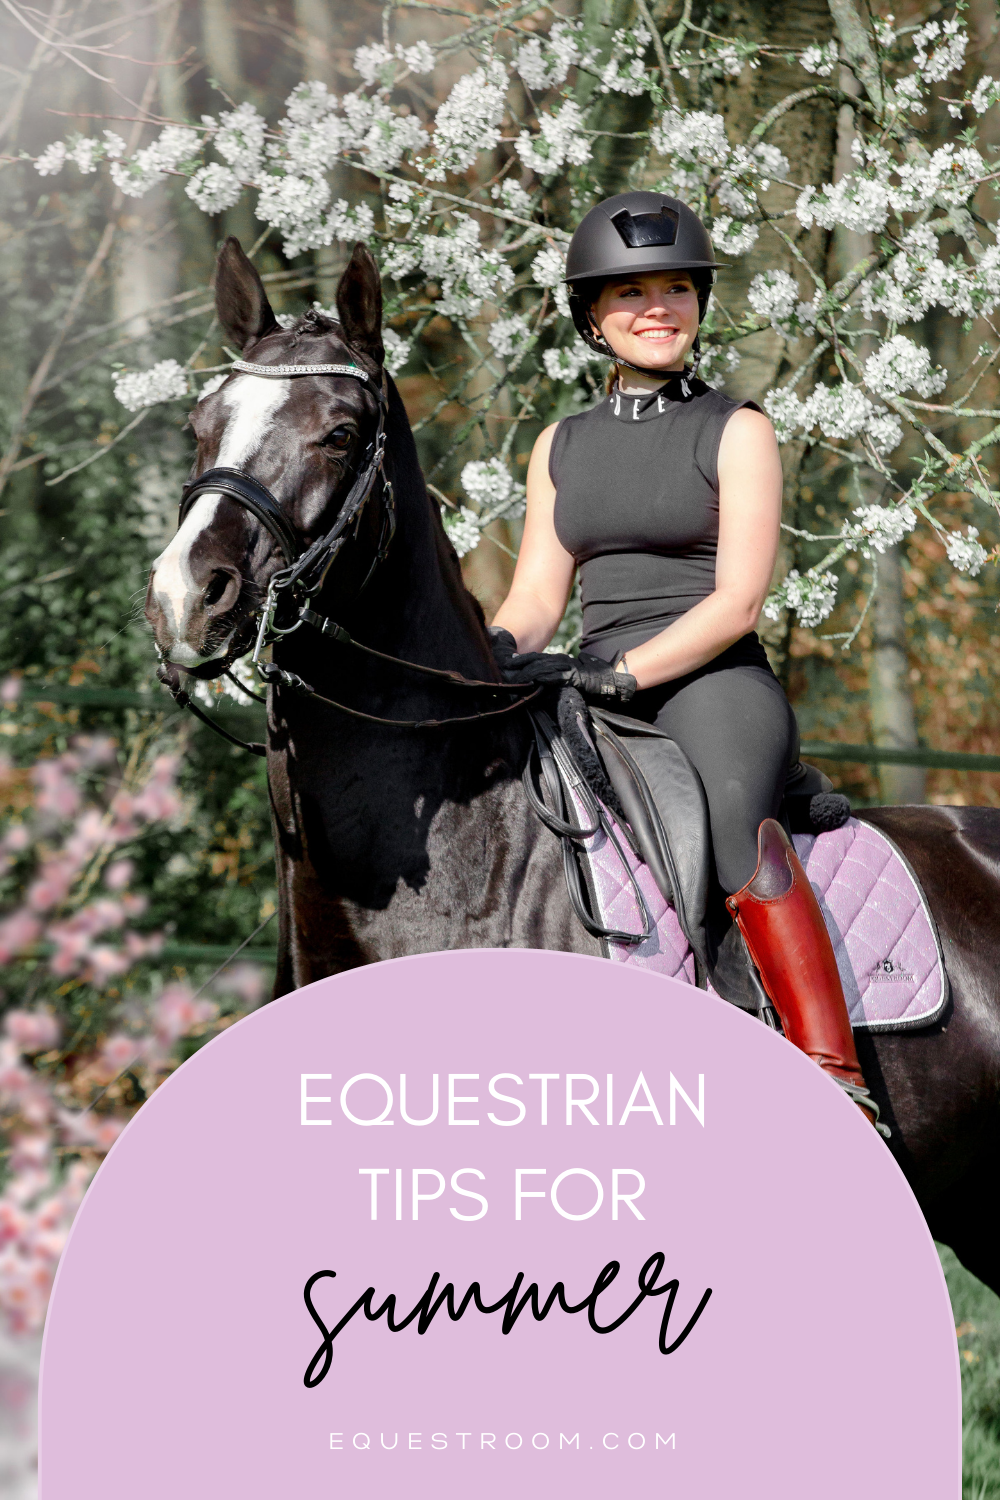 EQUESTRIAN TIPS FOR SUMMER